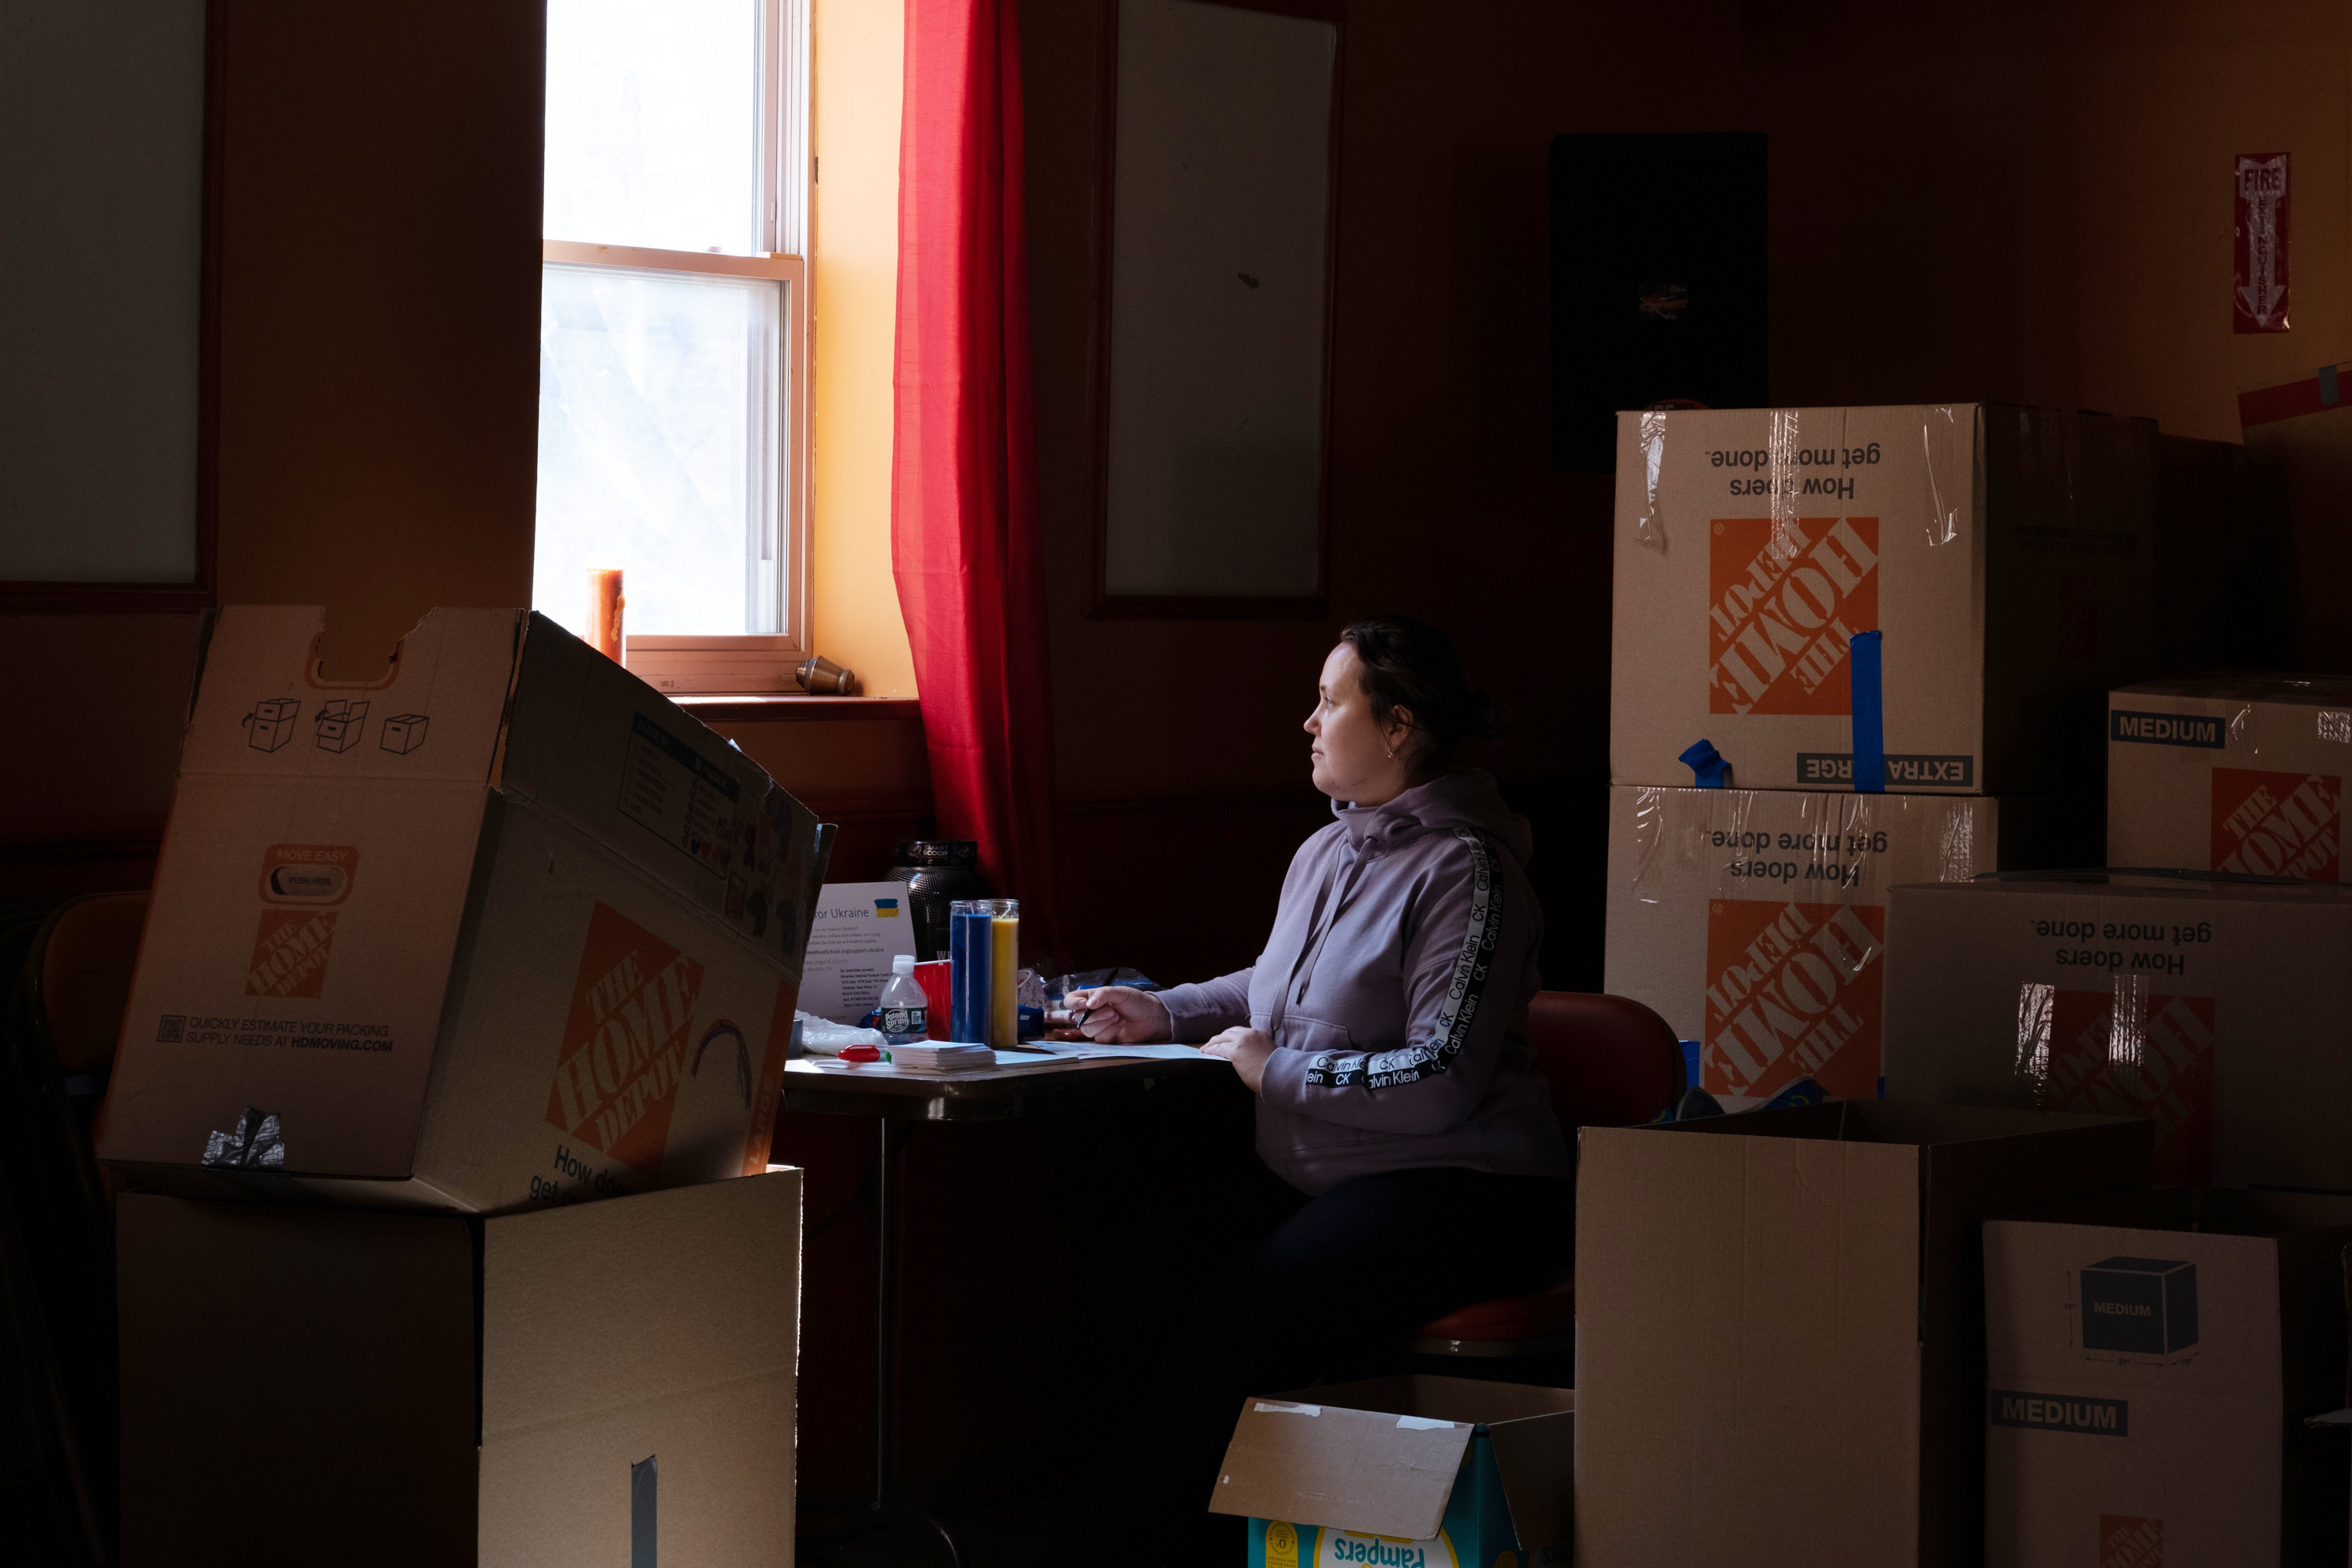 A woman sits at a desk surrounded by cardboard boxes 